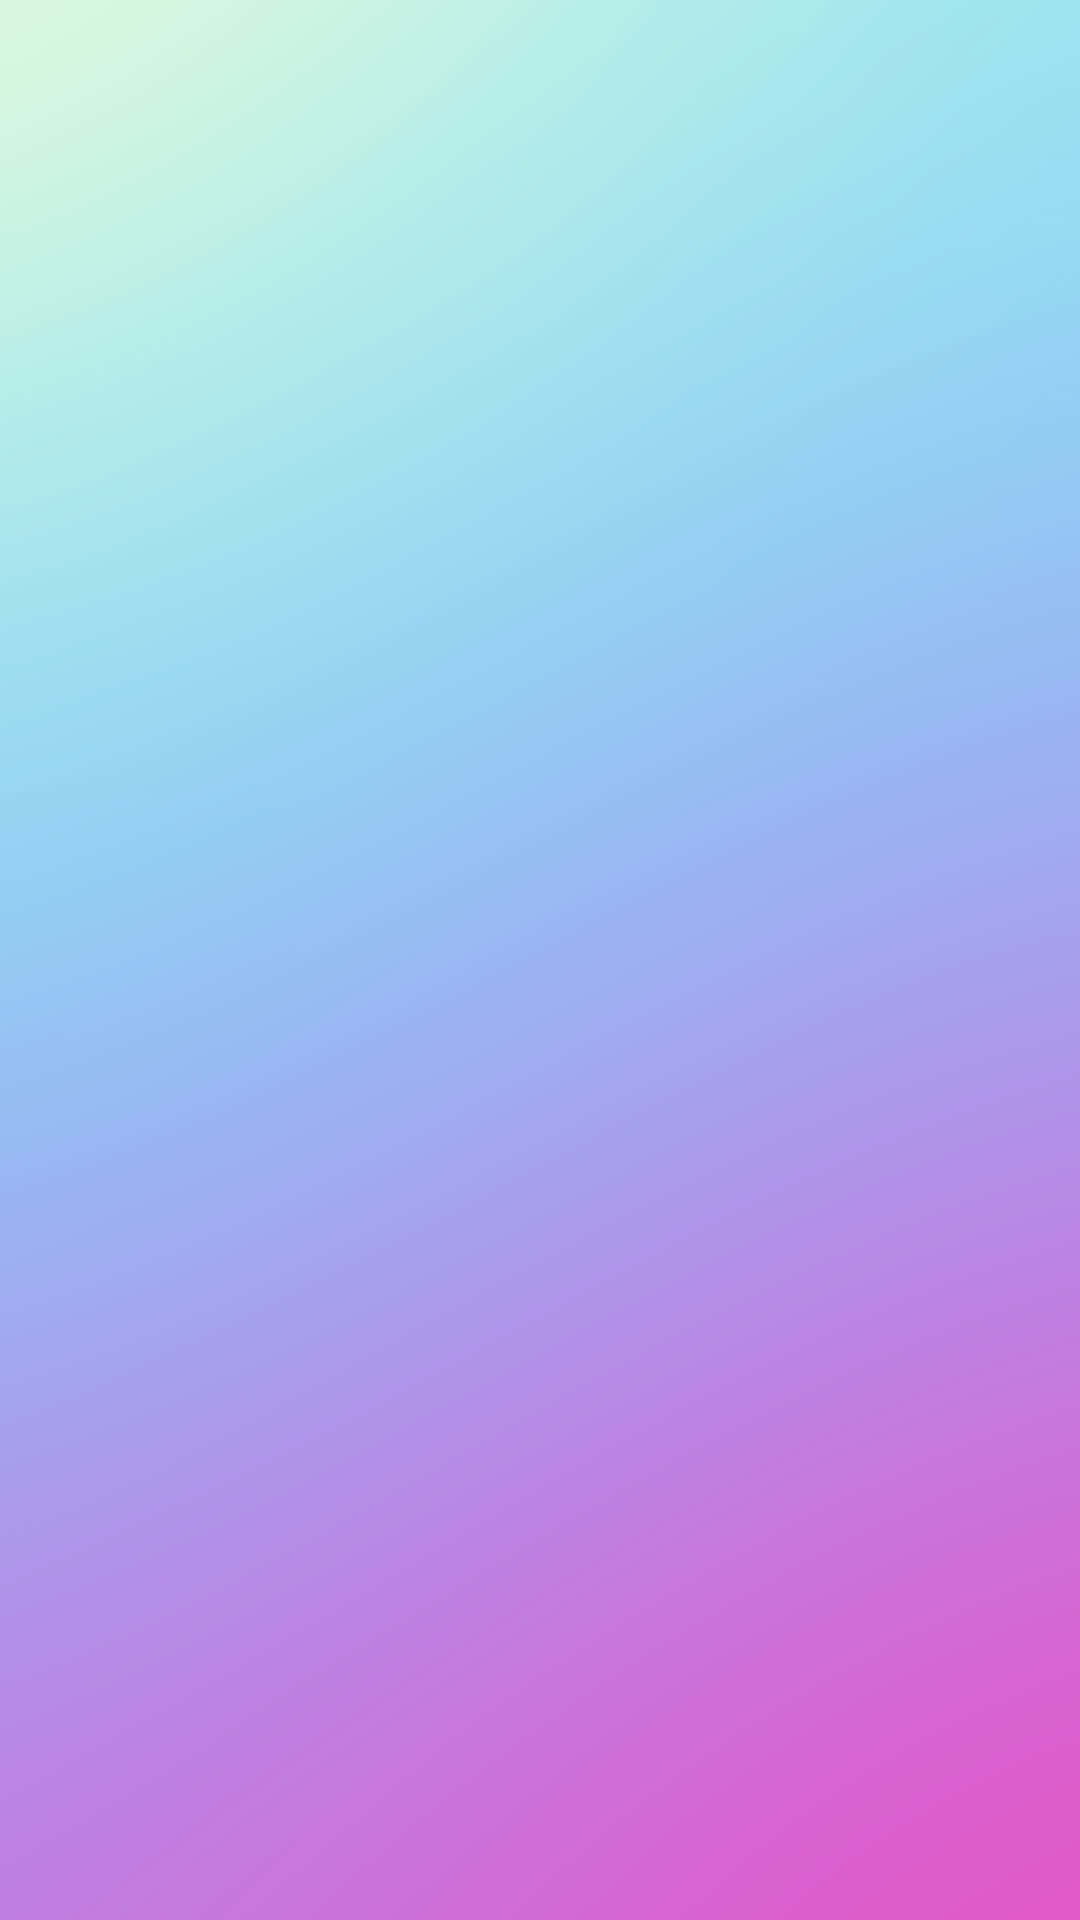 Pastel Gradient Background Blue And Hot Pink